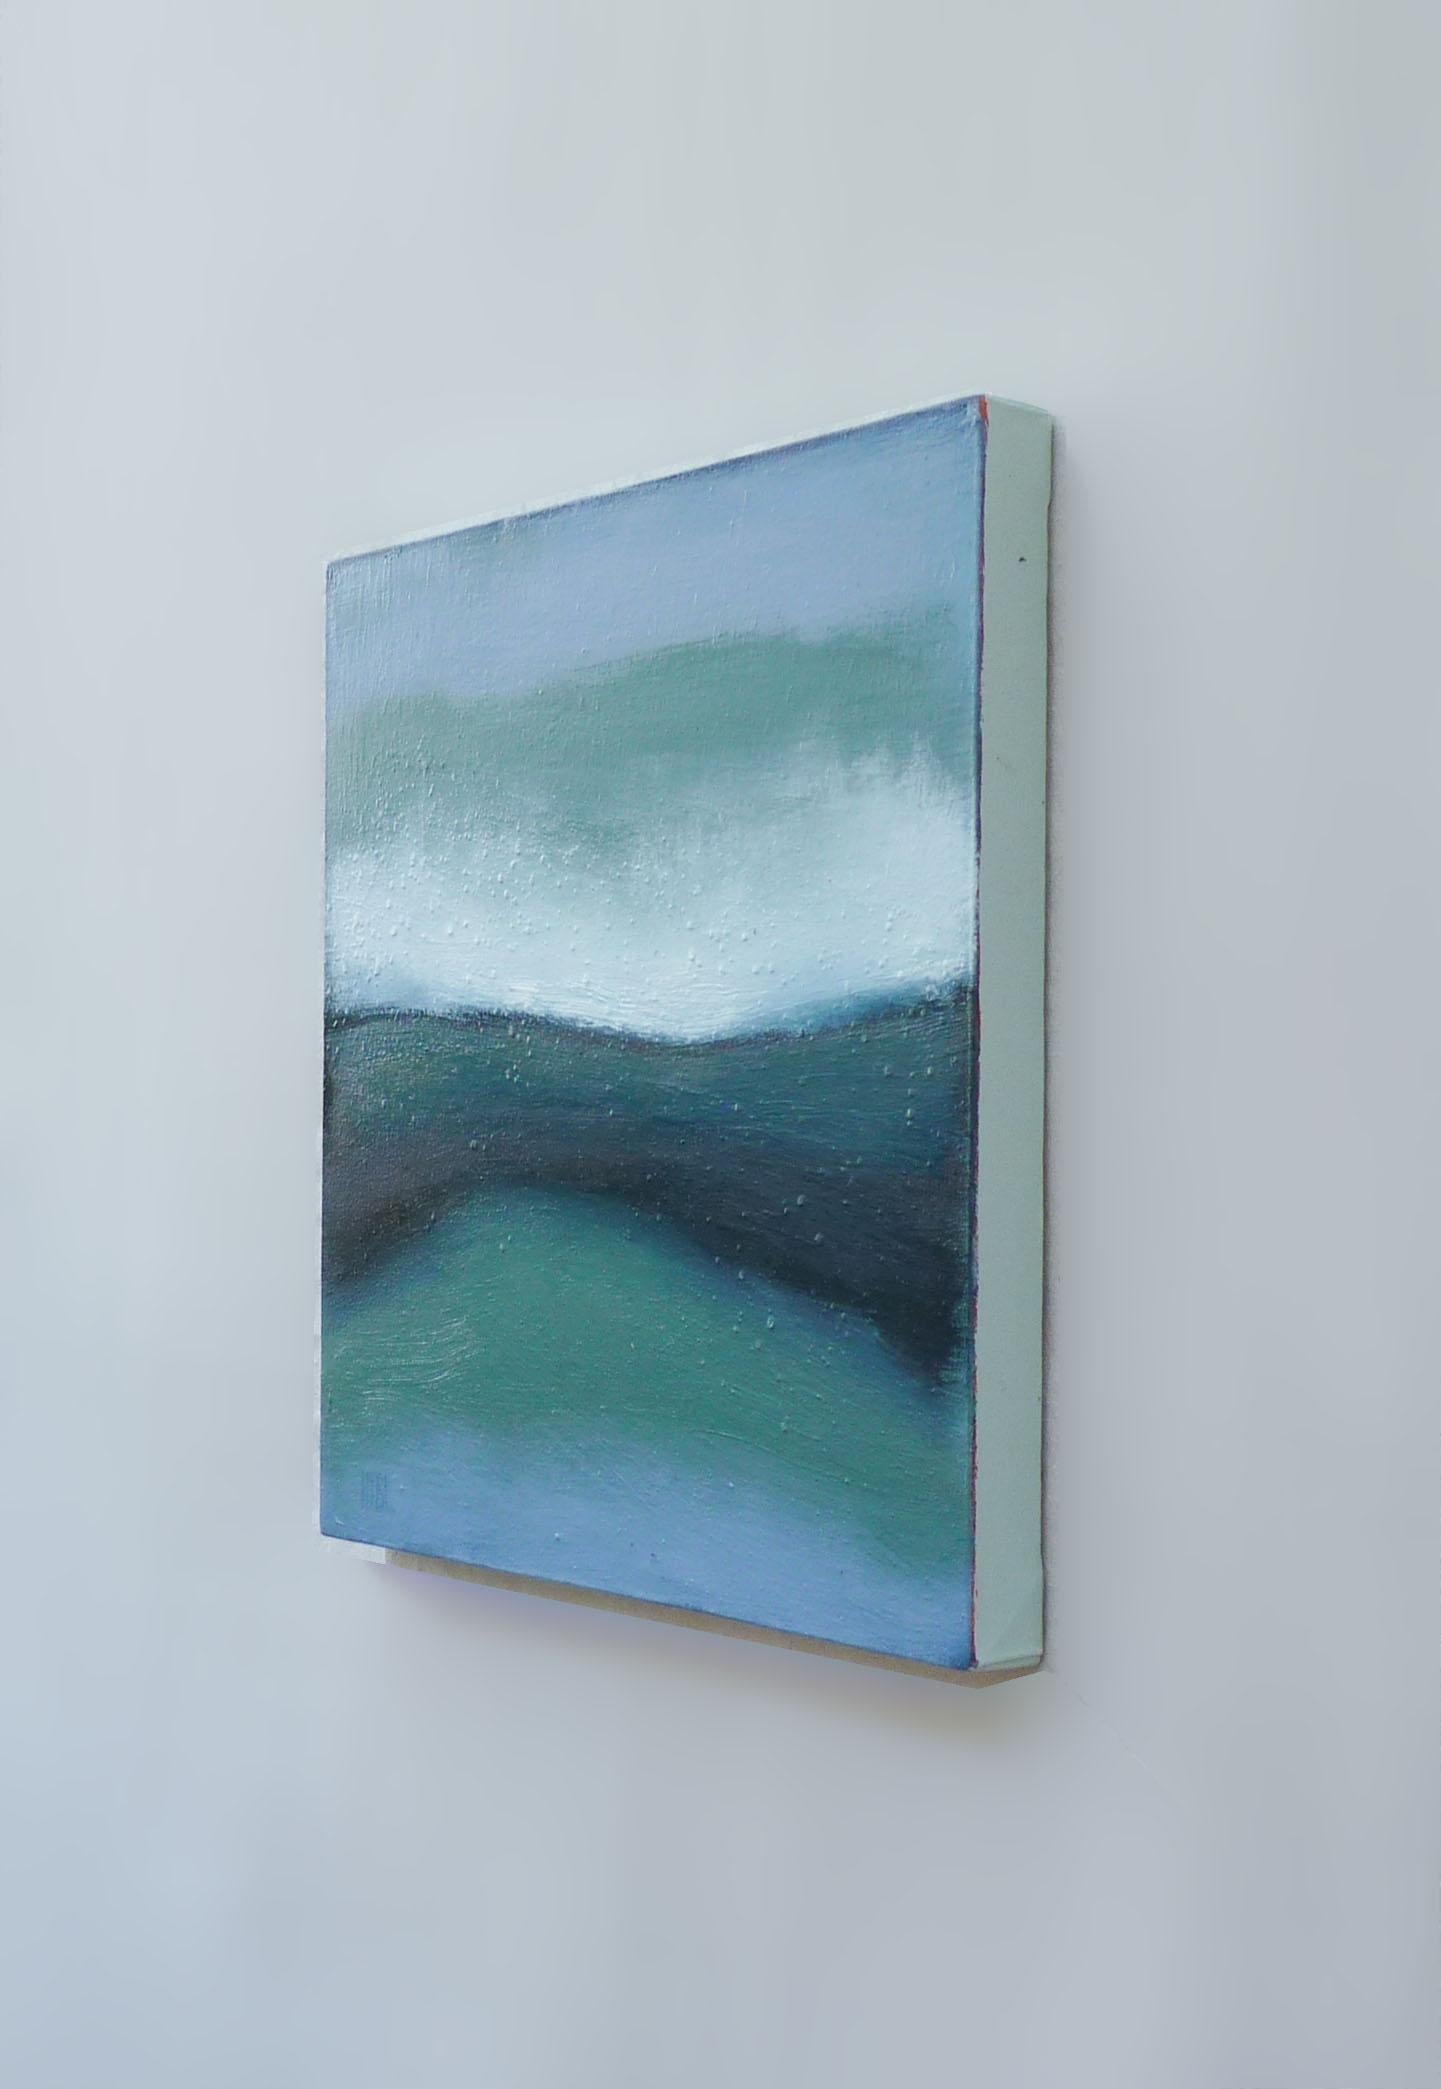 <p>Artist Comments<br>Artist Heidi Hybl presents an abstract seascape with rich blue and green hues. The colors of the Pacific Ocean glimmer in shifting waves, giving a peaceful and calm atmosphere. A soft band of white suggests a gentle fog as the